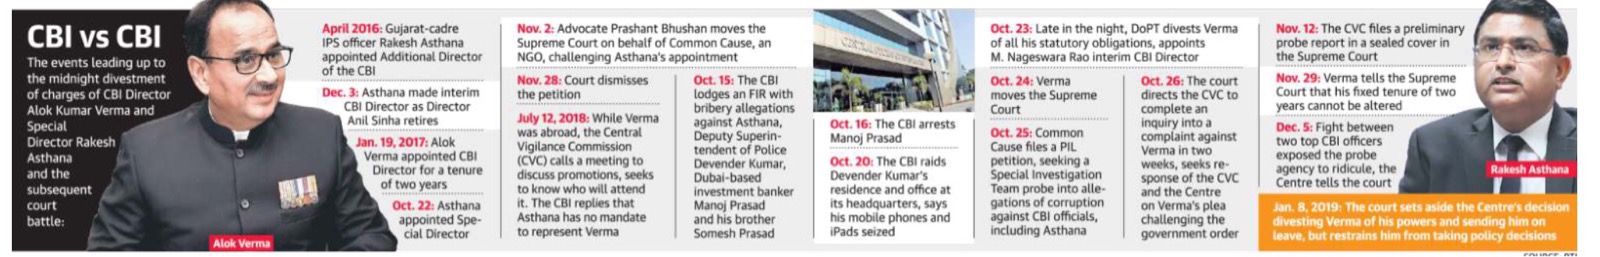 CBI vs CBI 
The events leading up to 
micfiight cfvestnwtt 
Of Of CBI Dir«tor 
Alok Kumar Verma and 
Scmal 
Director Rakesh 
Asthana 
and the 
subsemmt 
battle: 
2016: 
IPS offcer Rakesh Asthana 
appointed Additional Director 
of 
Dec. 3: Asthana made interim 
CBI Director as Director 
Anil Sinha retires 
Jan. 19.2017: Alok 
Verma appointed CBI 
Director tot a tenwe 
of two years 
22: Asthana 
appointed SR. 
cial Chrector 
Nov. 2: Adv«ate Prashant Bhushan 
Supreme Court on behalf Of Cornmon Cause. an 
NGO. challeng•ng Asthana•s appointrnent 
23: Late in the night. DOPT divests Verma 
Of all his Statutory Obbqations. appoints 
M. Nageswara Rao interim CBI Director 
Nov. 28: Court dismisses 
the '*tition 
My 12.2018: While verma 
was the Central 
Vigilarxe Comrmssion 
(CVC) calls a n.eting to 
discuss p. cymtnns. Rks 
to know Who will attend 
it. The CBI that 
Asthana has rx) rnandate 
to revesent 
Oct. CBI 
lodges an FIR with 
bribery 
aganst Asthana, 
Deputy Superin• 
tendent of Police 
t»vender Kumar, 
Dubai 
investment banker 
Manoj Prasad 
and his brother 
Sorr—h Prasad 
Oct. 16: The CBI arrests 
Mano Prasad 
(Xt. 20. The CBI raids 
tkven&r Kumar's 
residence and omce at 
its headquarters. says 
mobile phores and 
iPads seized 
24: Verma 
the Supreme 
Court 
25: Comnu1 
cause files a PIL 
crtition. seekir" a 
Sßcial Investigation 
Team probe into alle- 
gations of corruption 
against CBI othaals. 
irrtudit» Asthana 
Oct. 26: COIrt 
directs CVC to 
complete 
inquiry into a 
cornplaint 
Verma in two 
weeks. re• 
sponse of the CVC 
the Centre 
on Verrna•s plea 
the 
governrrmt 
Nov. 12: The CVC htes a prelirninary 
probe report in a seal«i cover in 
the Supreme Court 
NOV. 29: Verna tells Supreme 
Court that his fixed tenure of two 
years cannot be alter«i 
Dec. •S: between 
two CBI officers 
exposed the probe 
agency to ridicule, ttw 
Centre tells the court 
Jan. 8.2019' cart 
Ovesti" Vemu of his powers .nd hen on 
•ave. restrains him from taking 